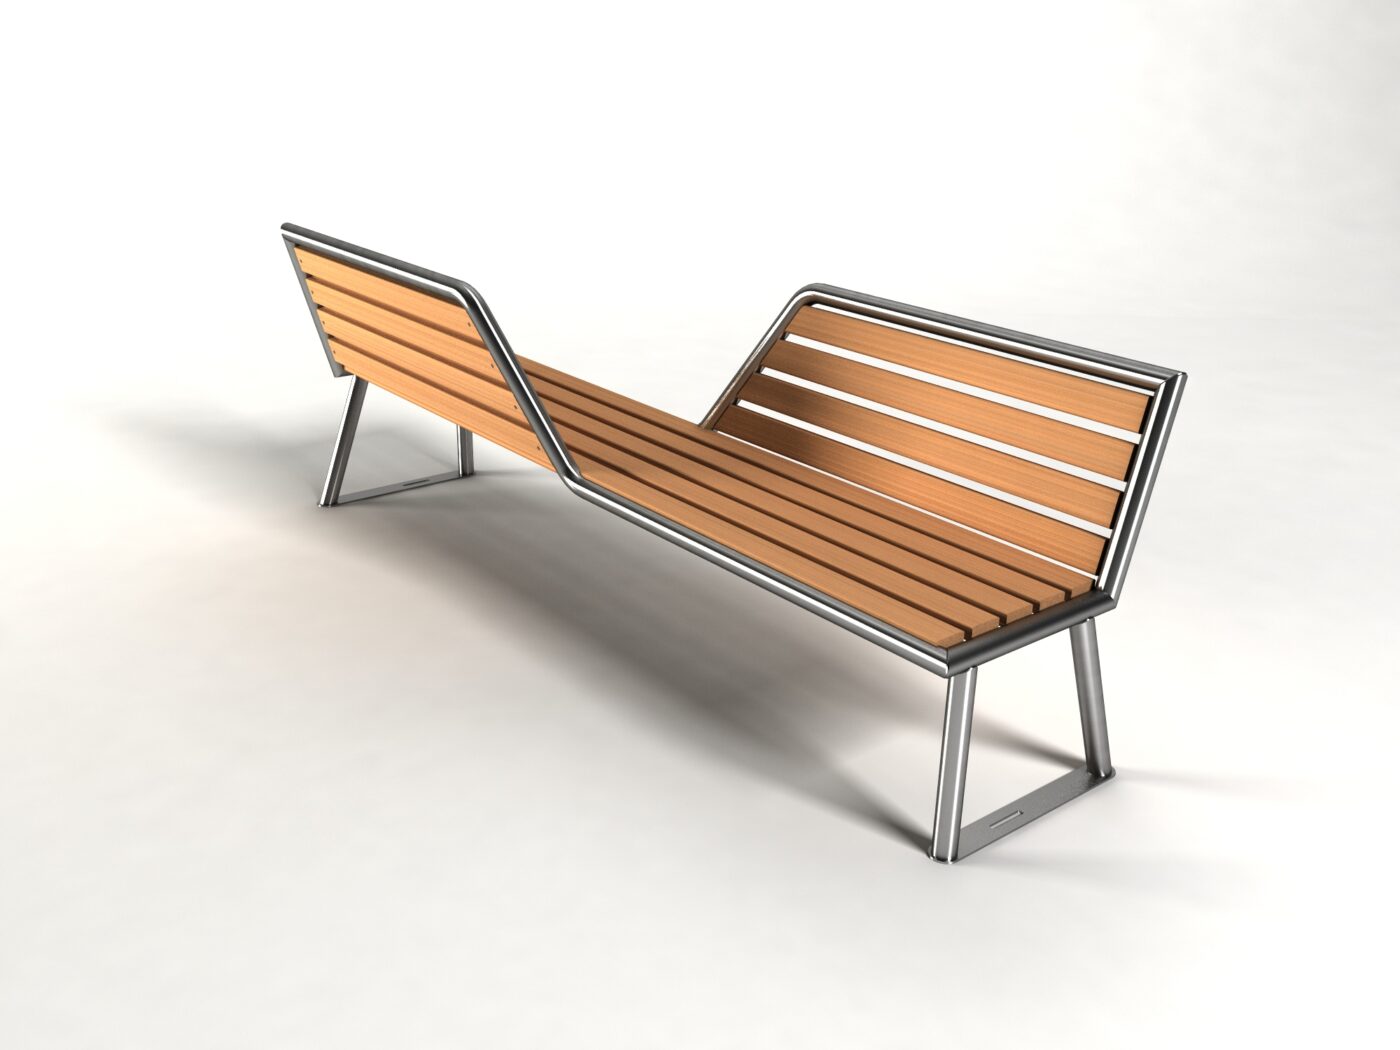 VIS-A-VIS BENCH for ABES (abes-online.com)
by Charles O. Job